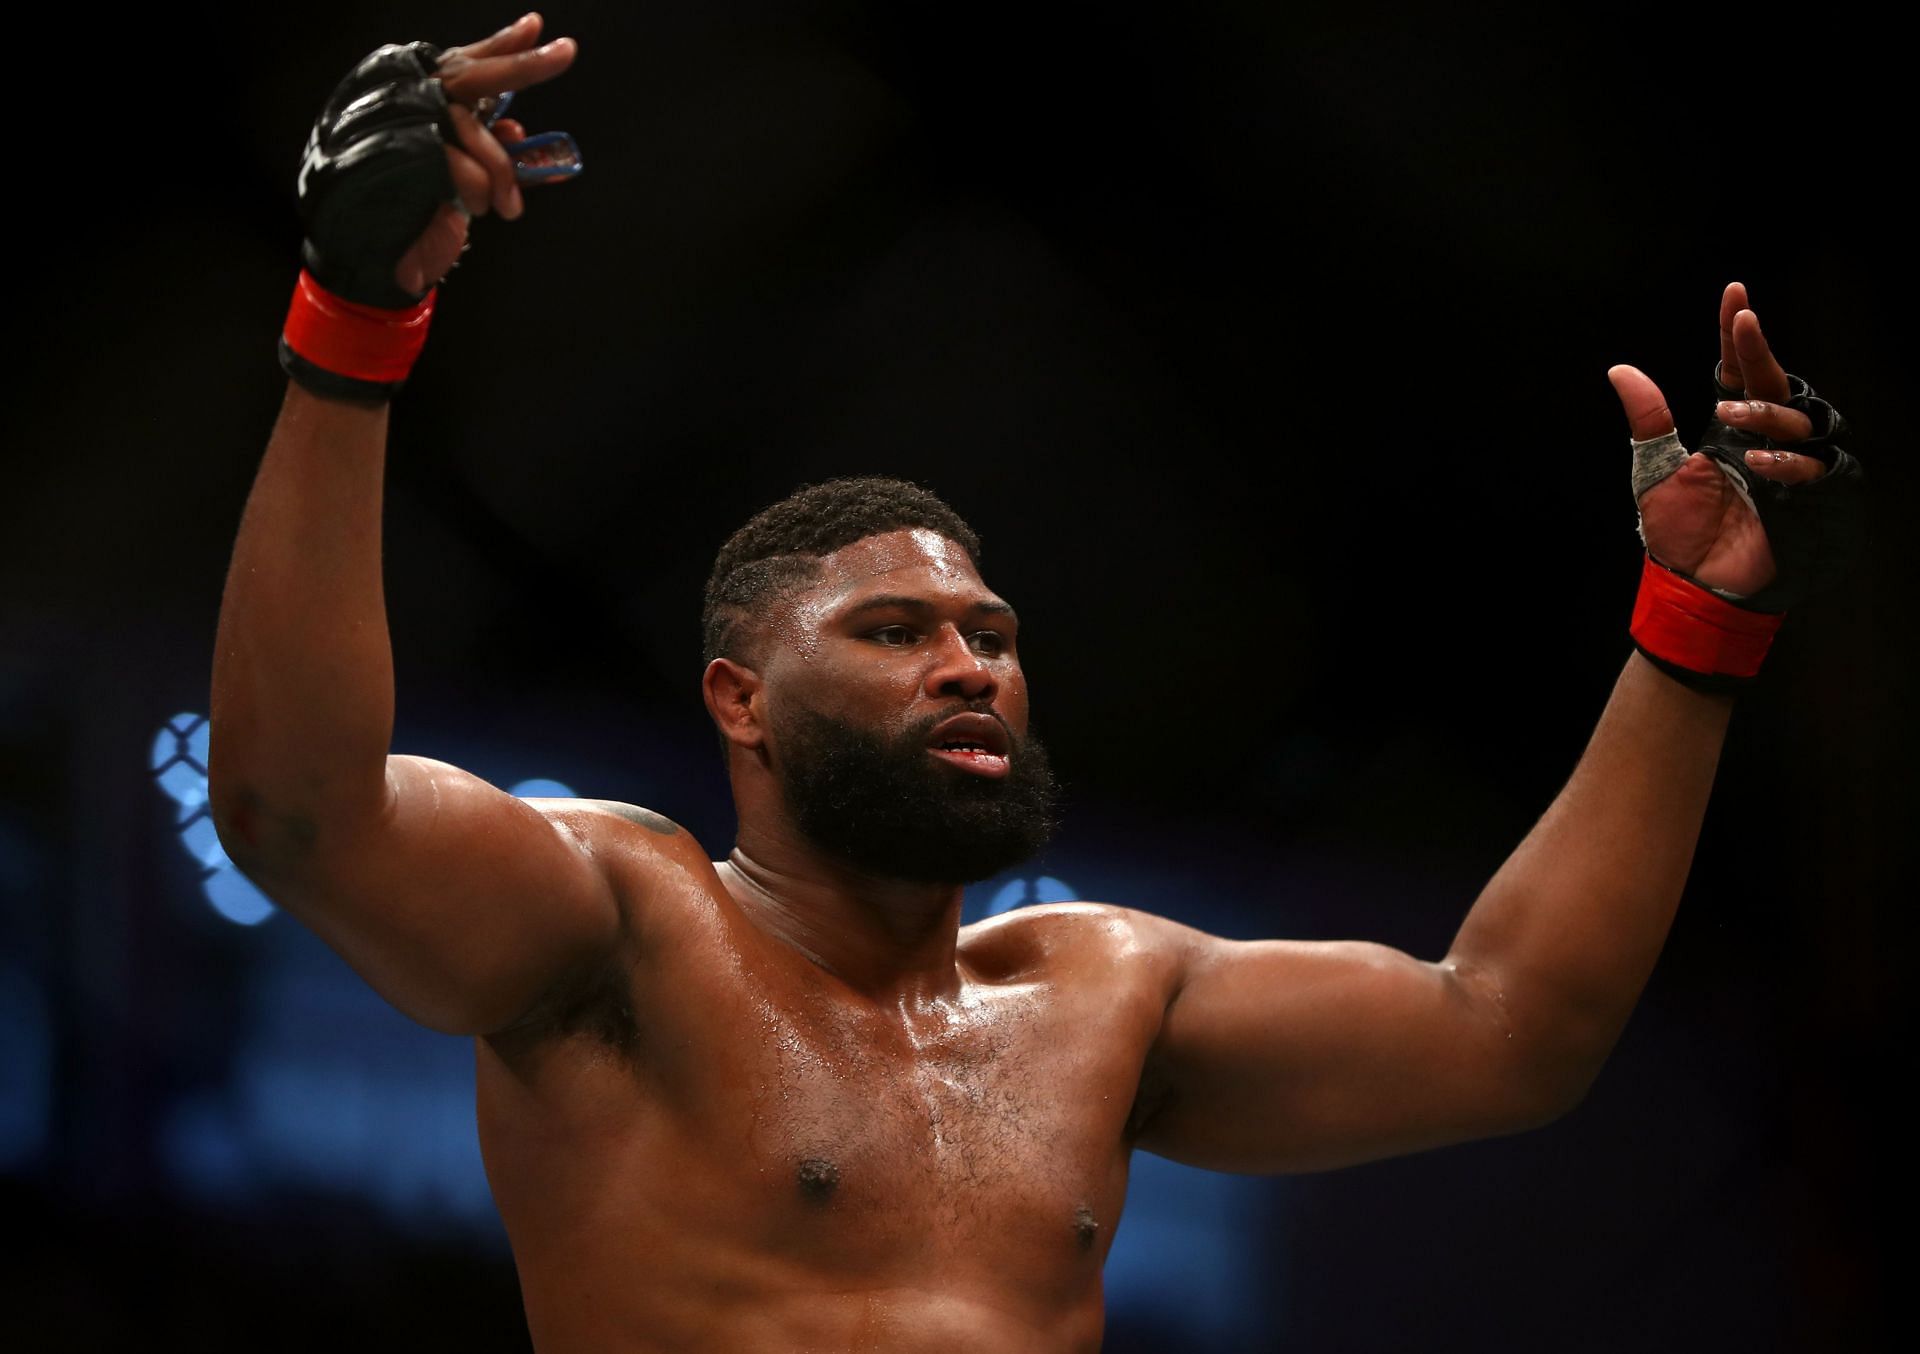 Reports suggest that Curtis Blaydes is ready to fight Jon Jones in early 2023